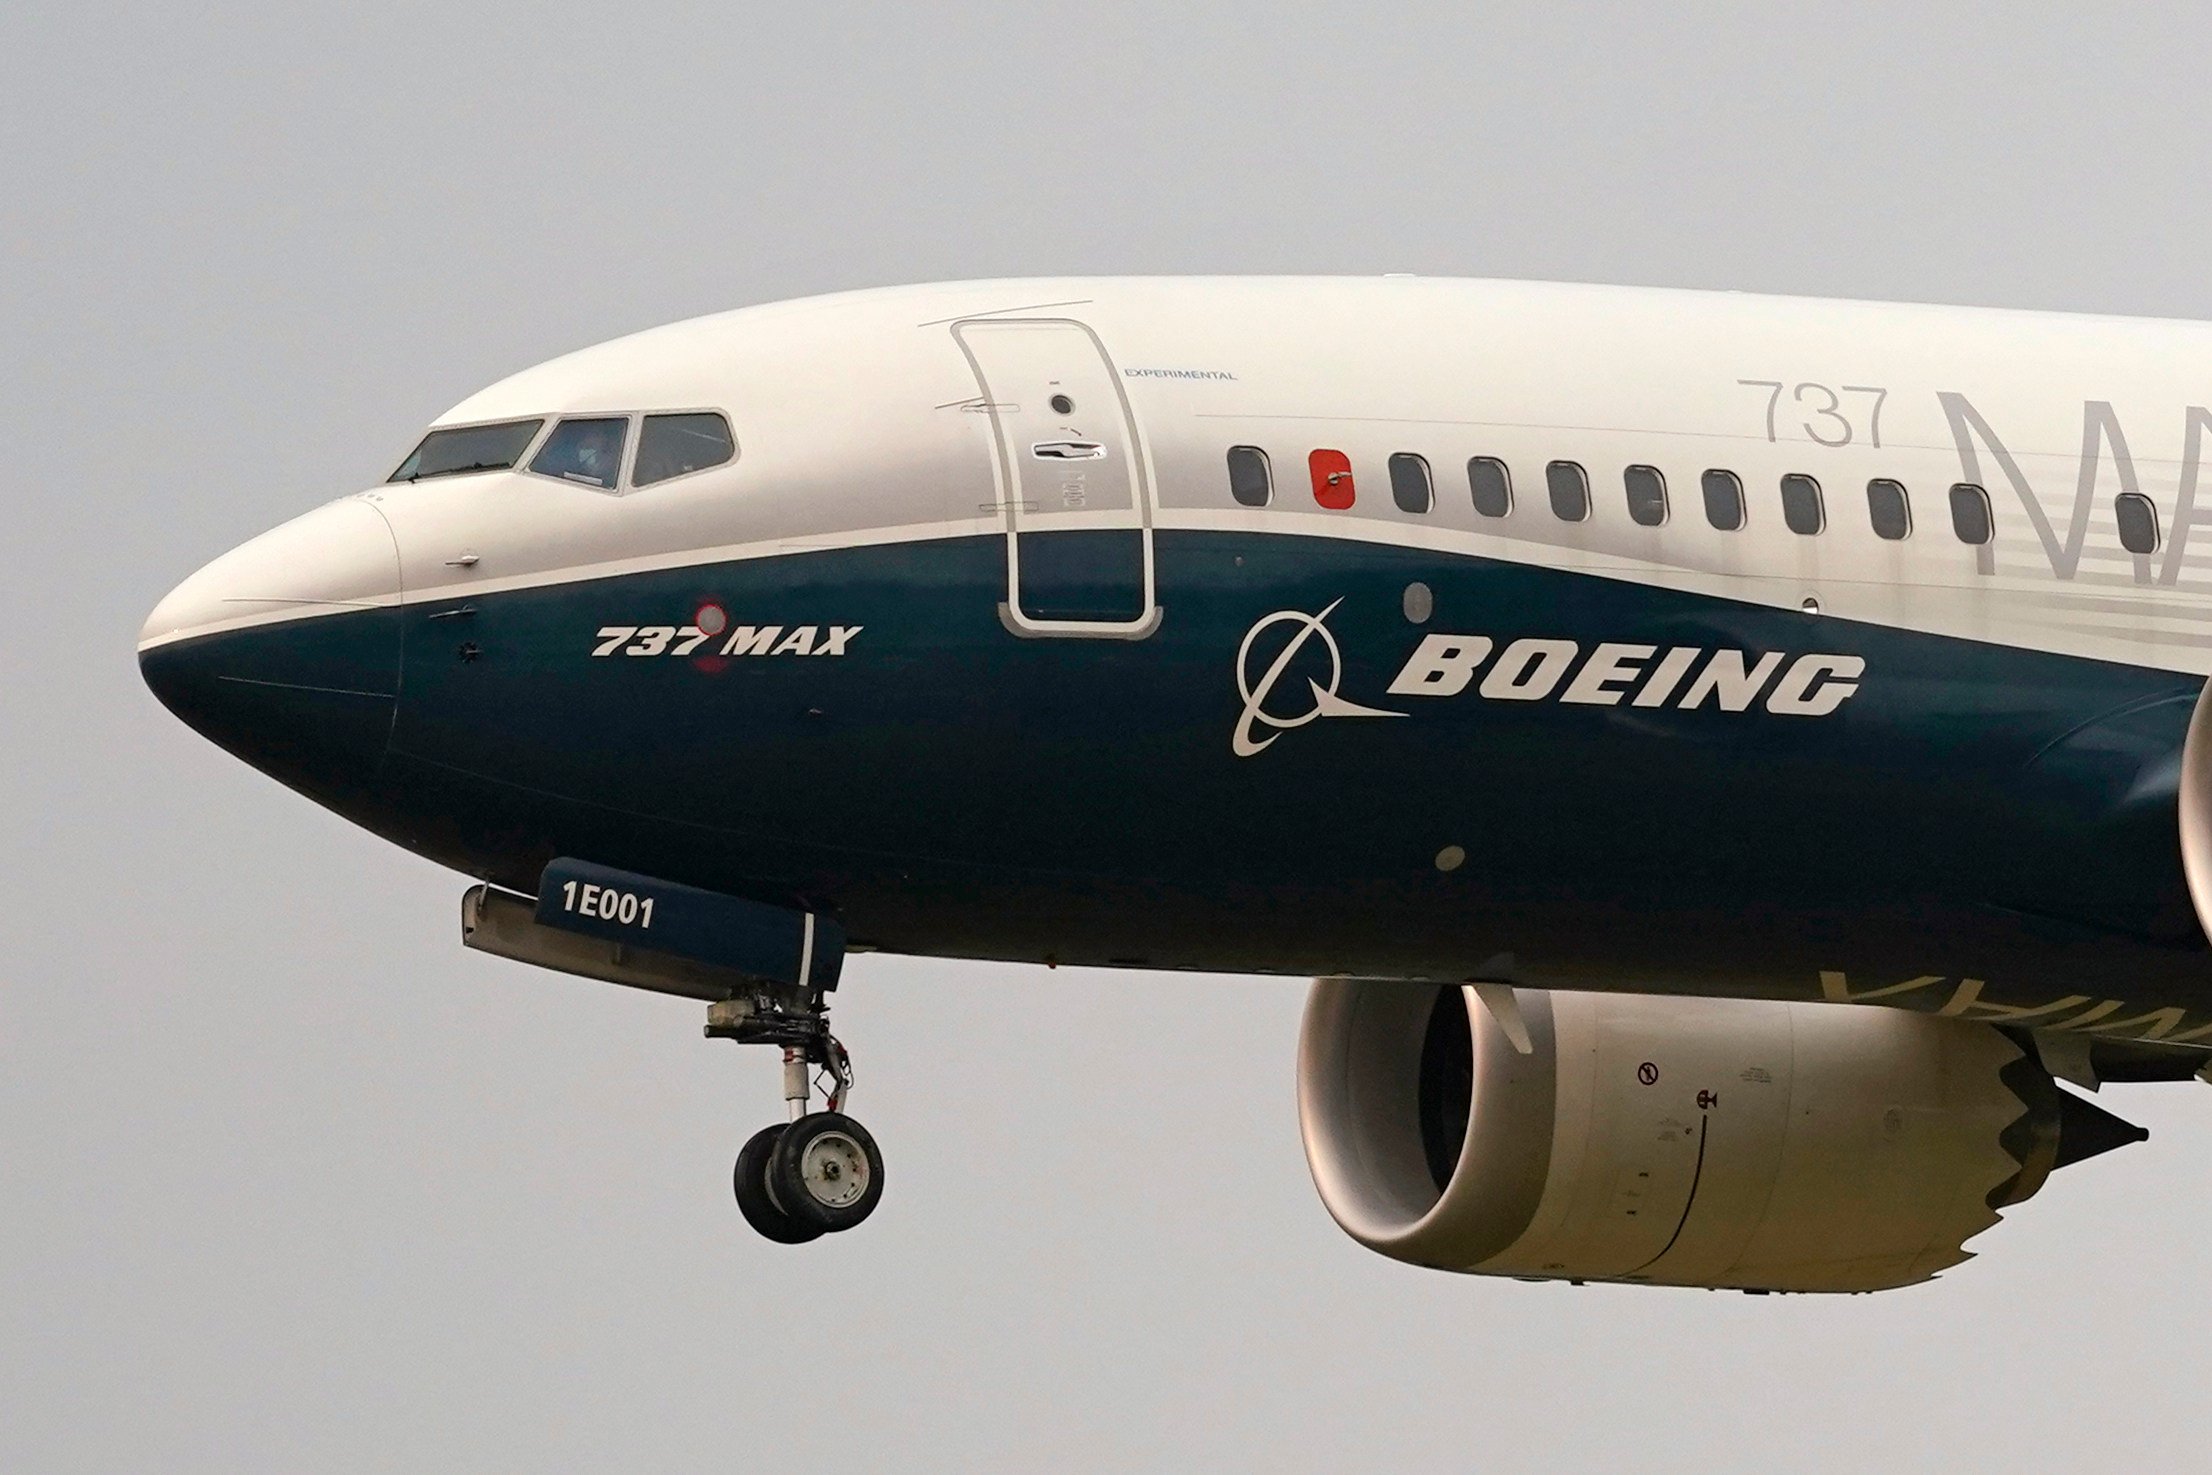 China grounded the Boeing 737 MAX in March 2019 after deadly crashes in Indonesia and Ethiopia. Photo: AP